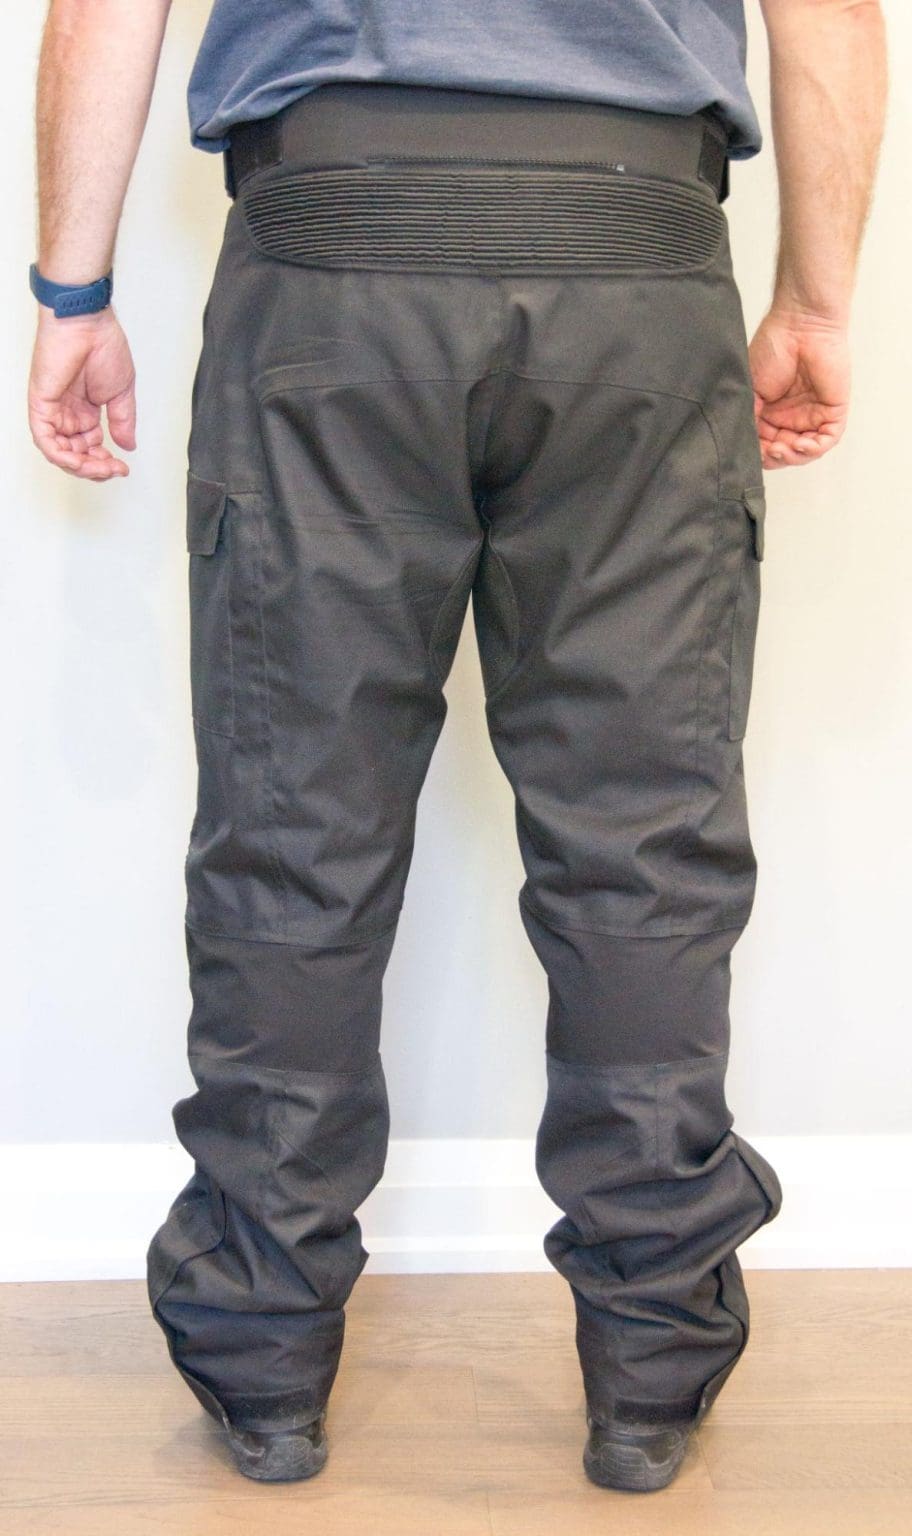 [REVIEW] Gryphon Moto Indy Pants